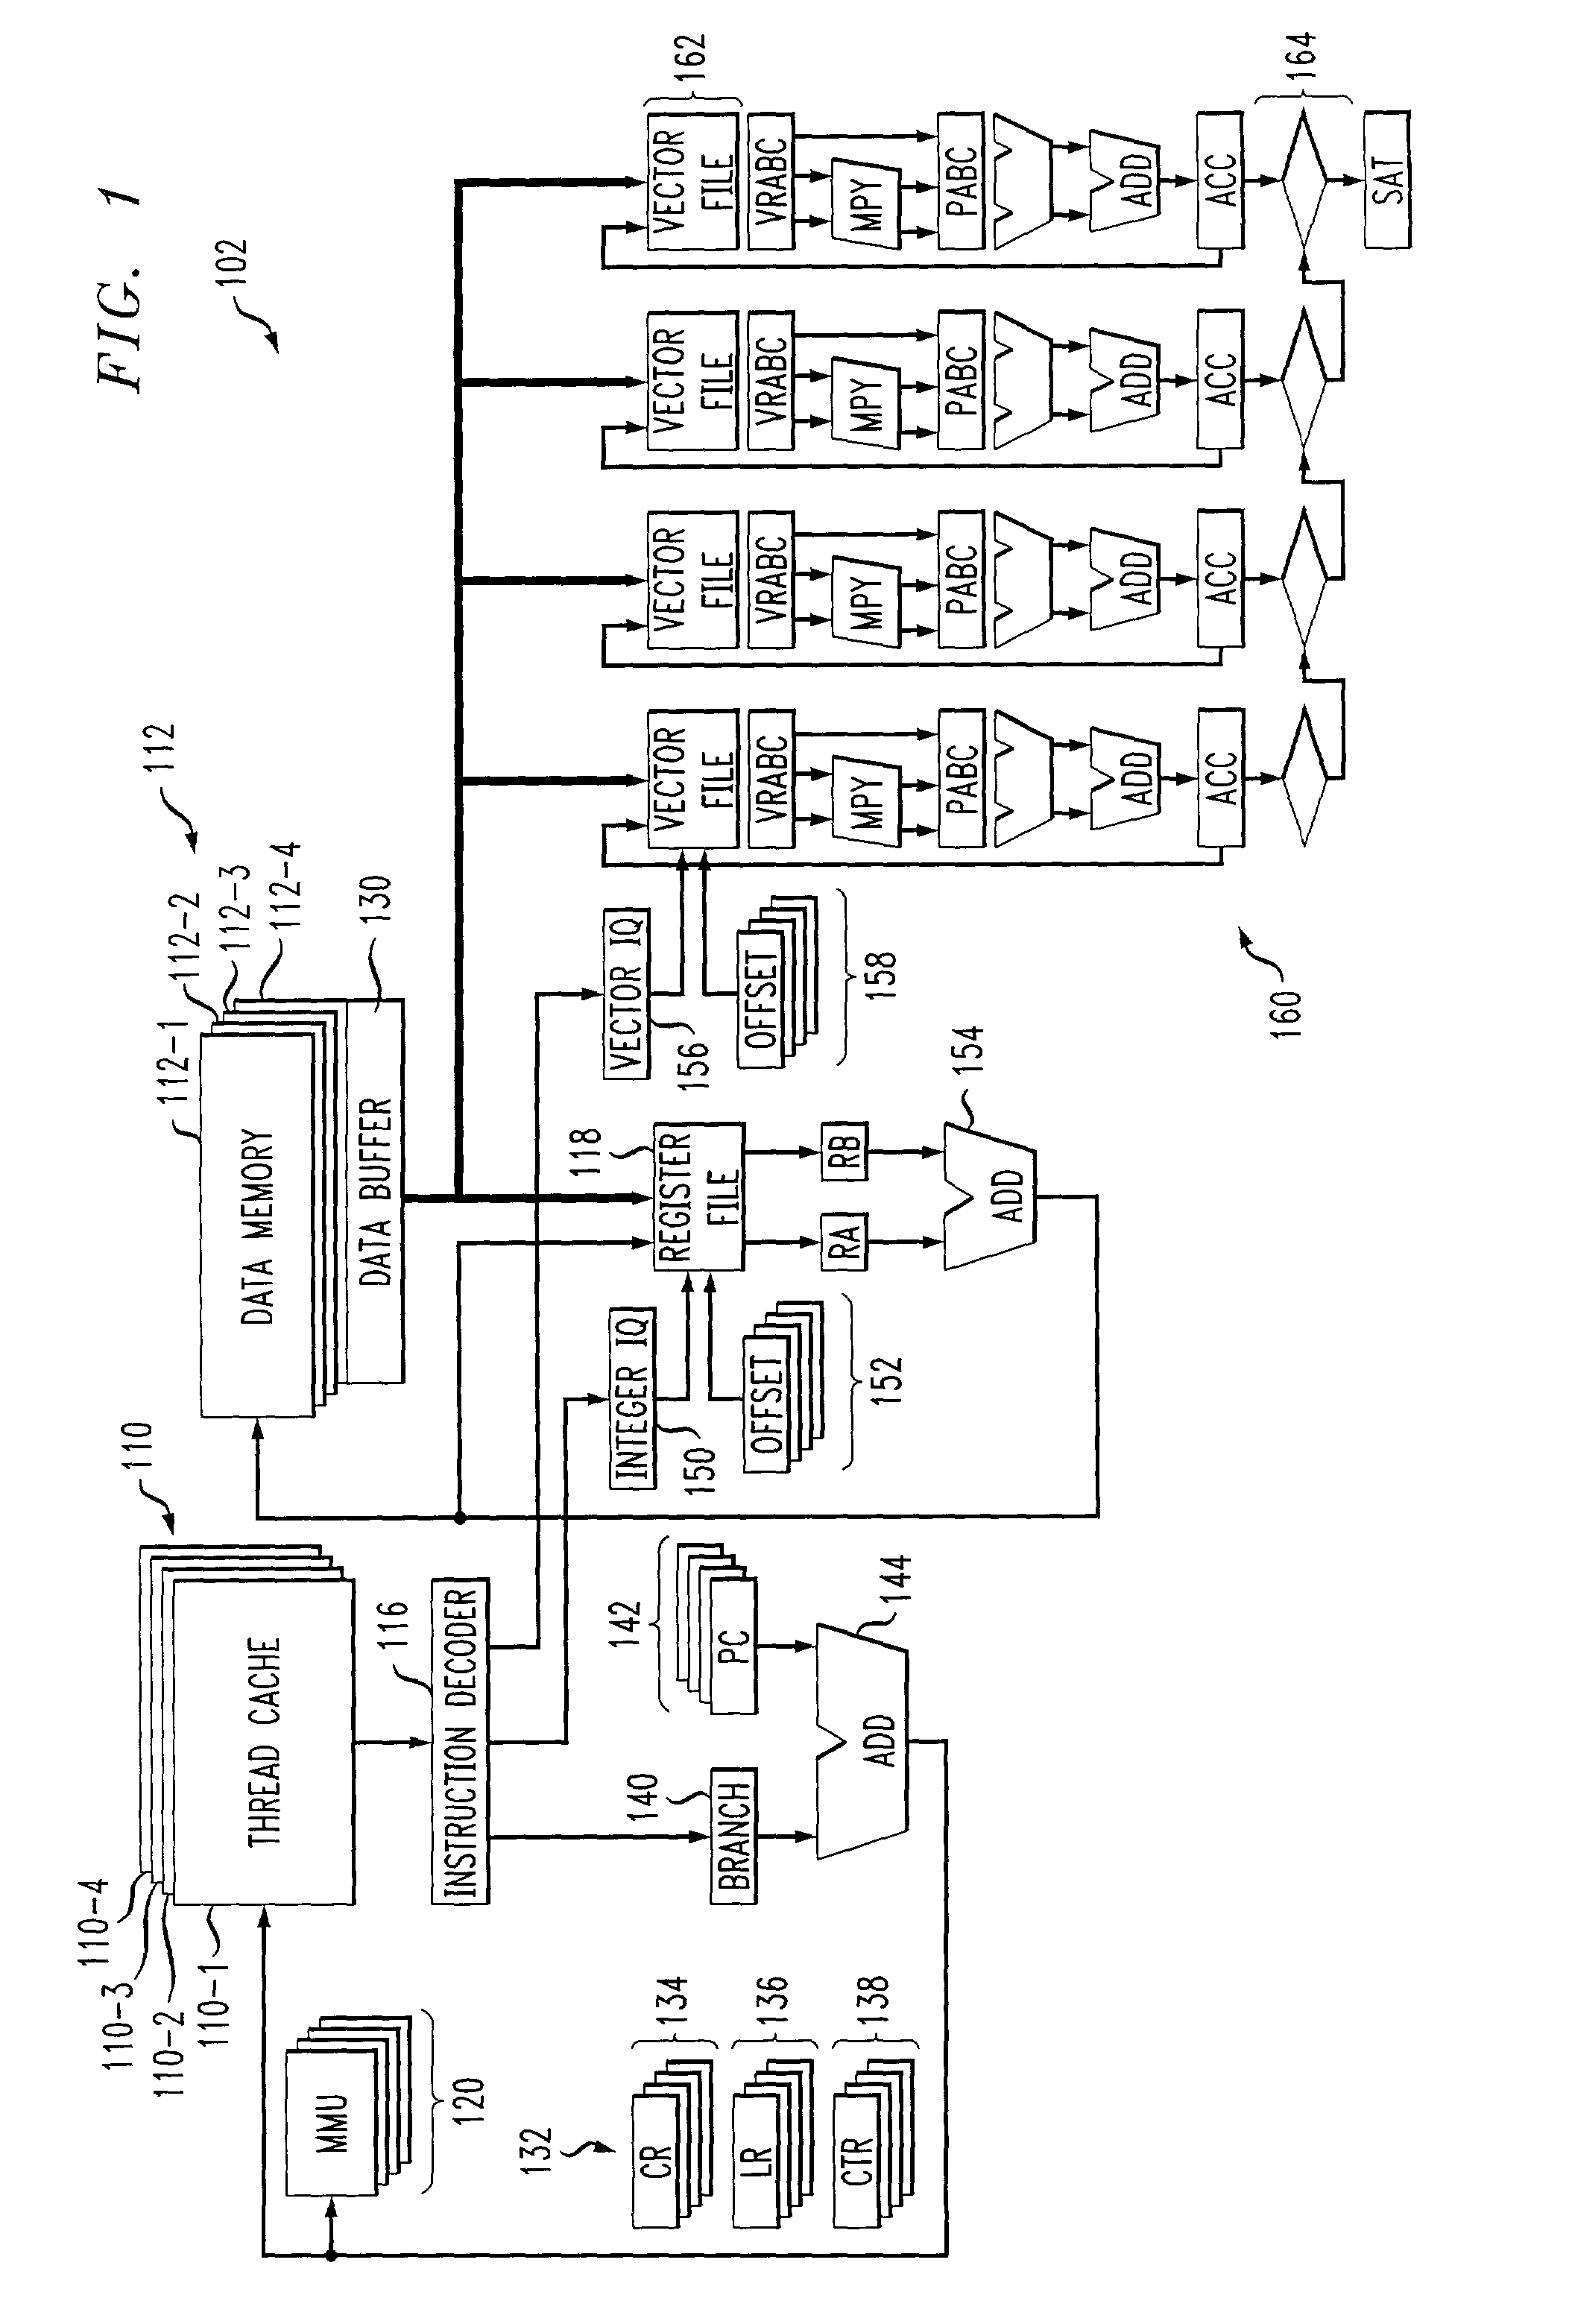 Multithreaded processor with efficient processing for convergence device applications